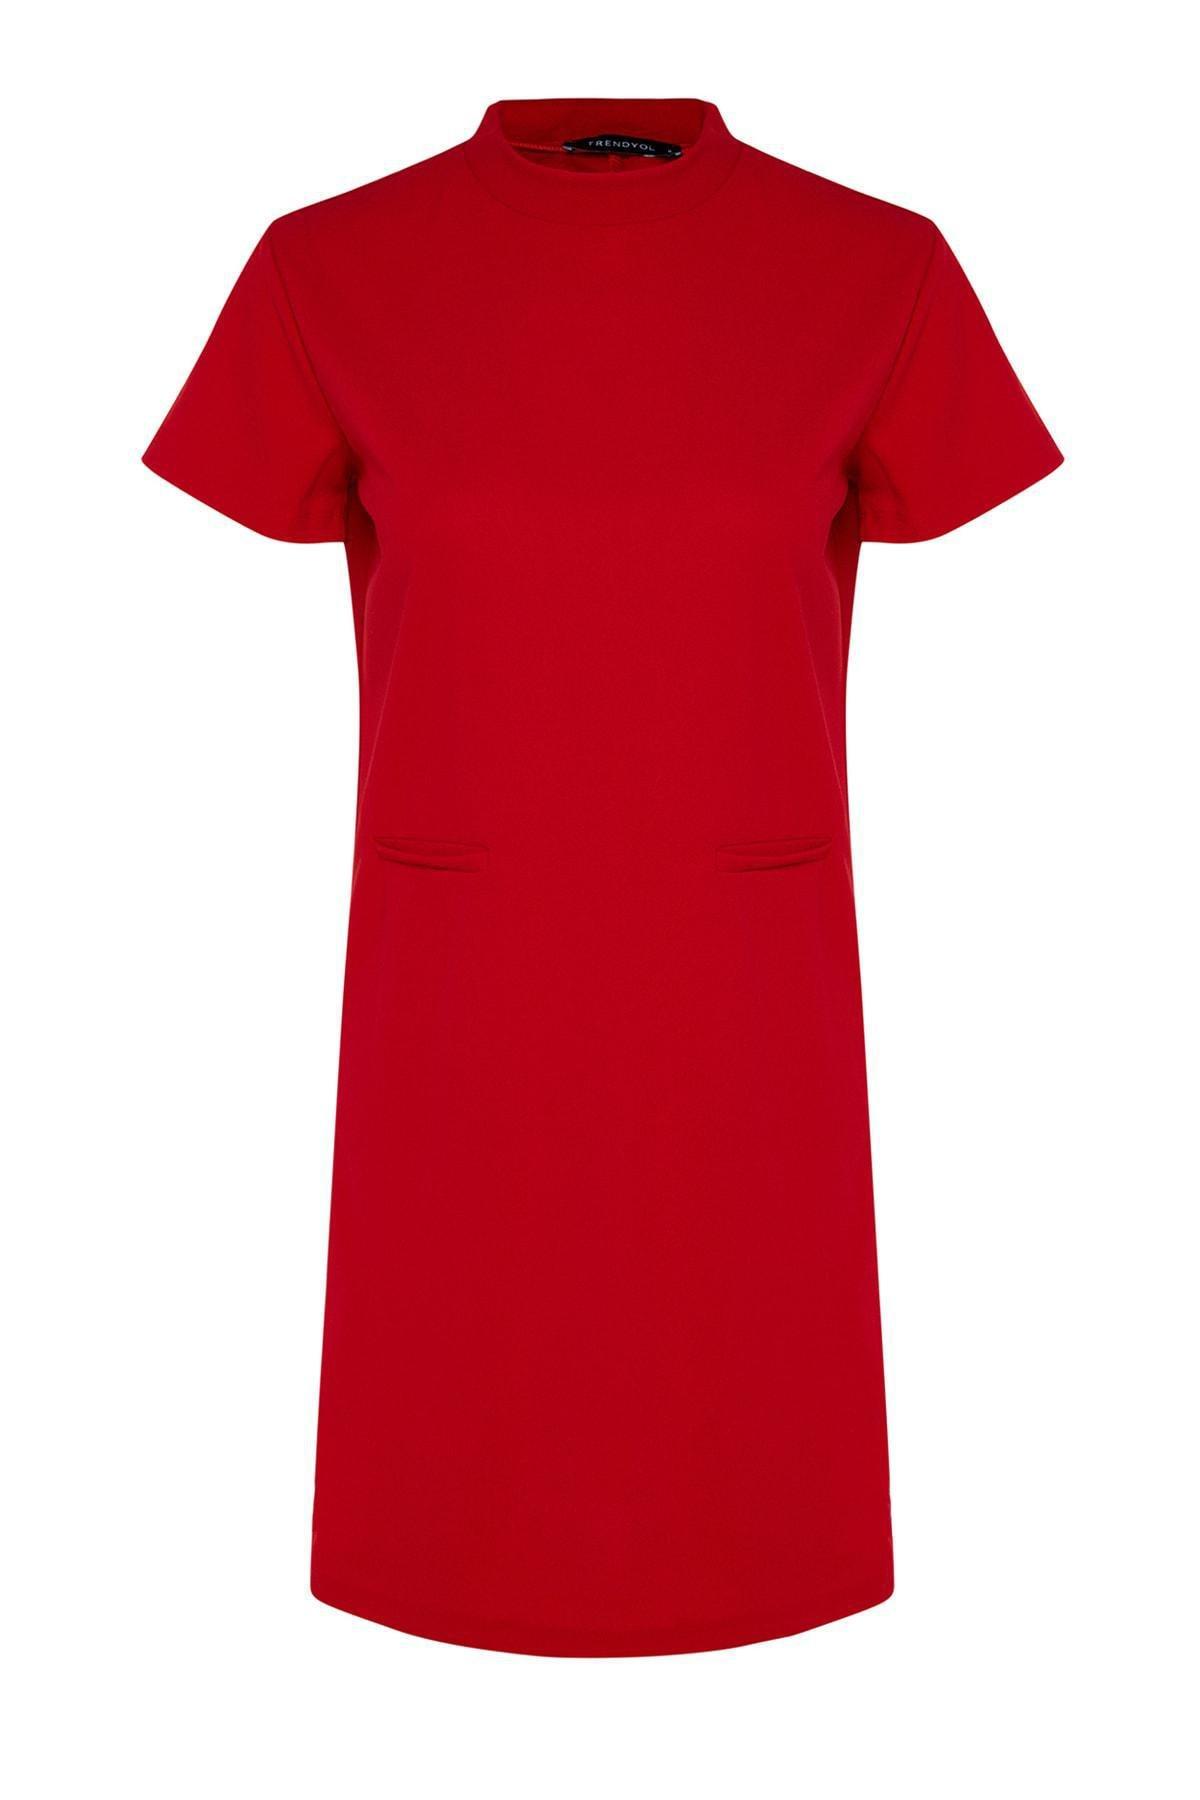 Trendyol - Red Relaxed Shift Dress